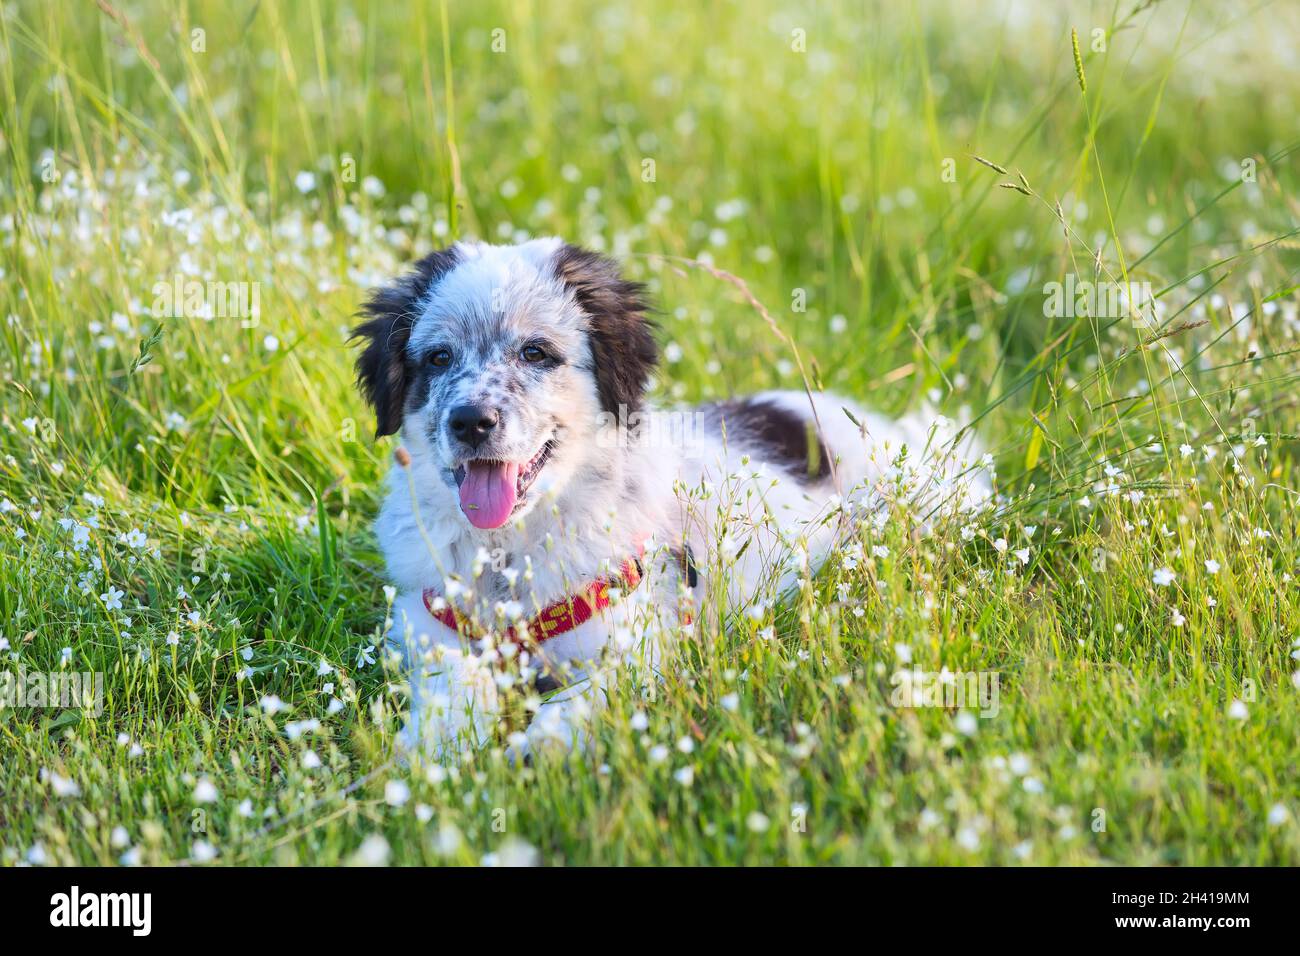 Puppy lying In the grass, close up portrait Stock Photo